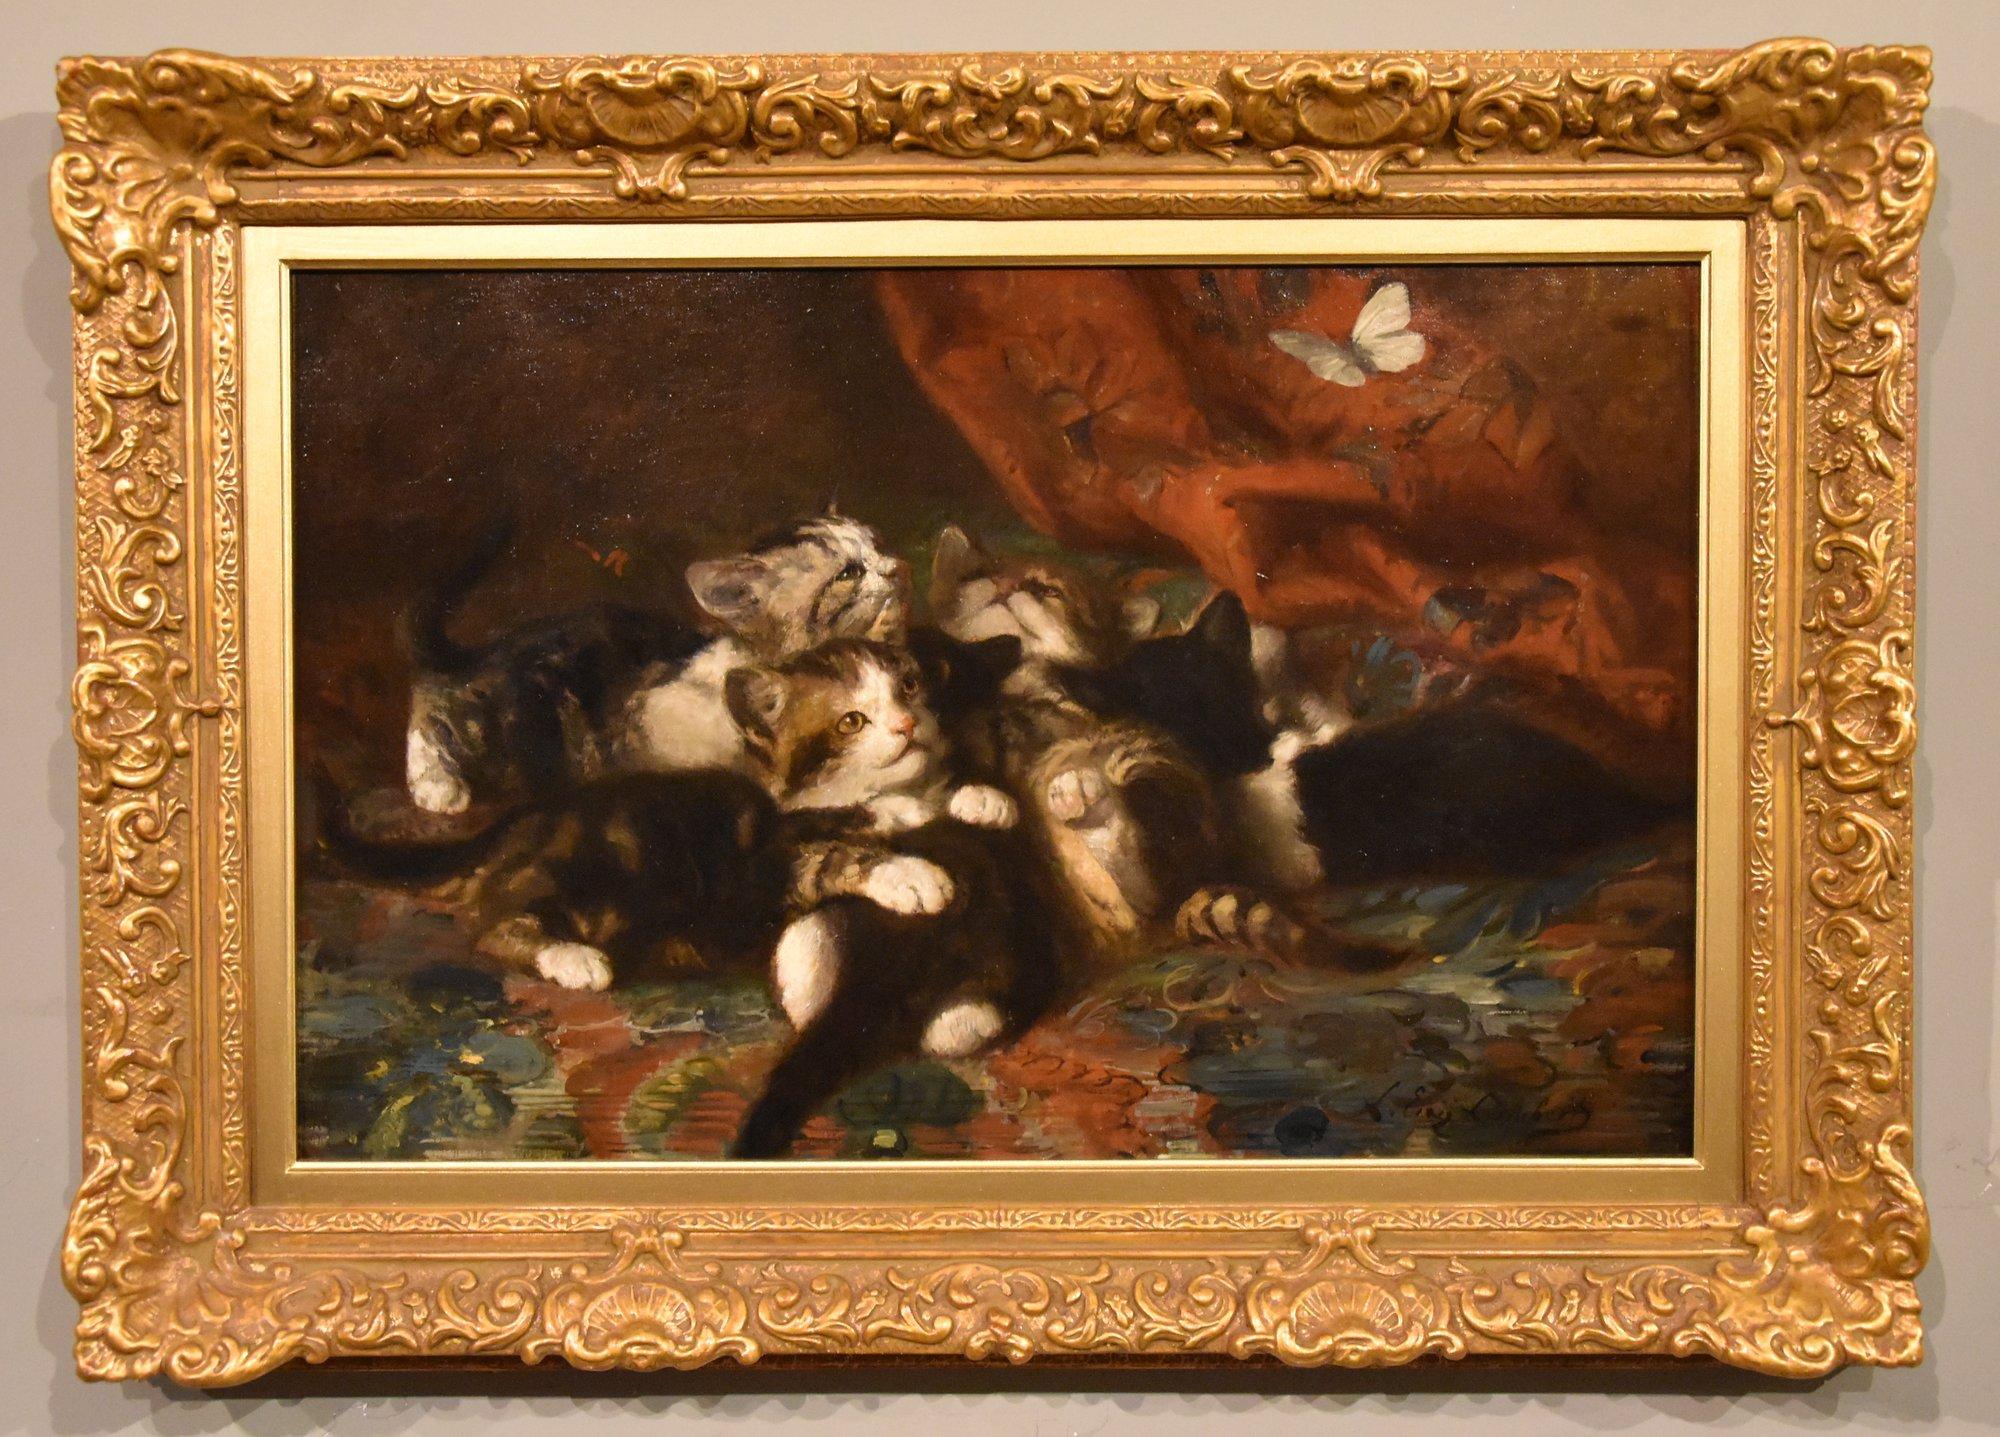 Oil Painting by Louis - Eugene Lambert "Kittens Chasing A Butterfly" 1825 - 1900 Lambert was afashionable animal painter from Paris studied under Delecroix and a regular exhibitor at the Salon. Oil on canvas. Signed

Dimensions unframed 15 x 23